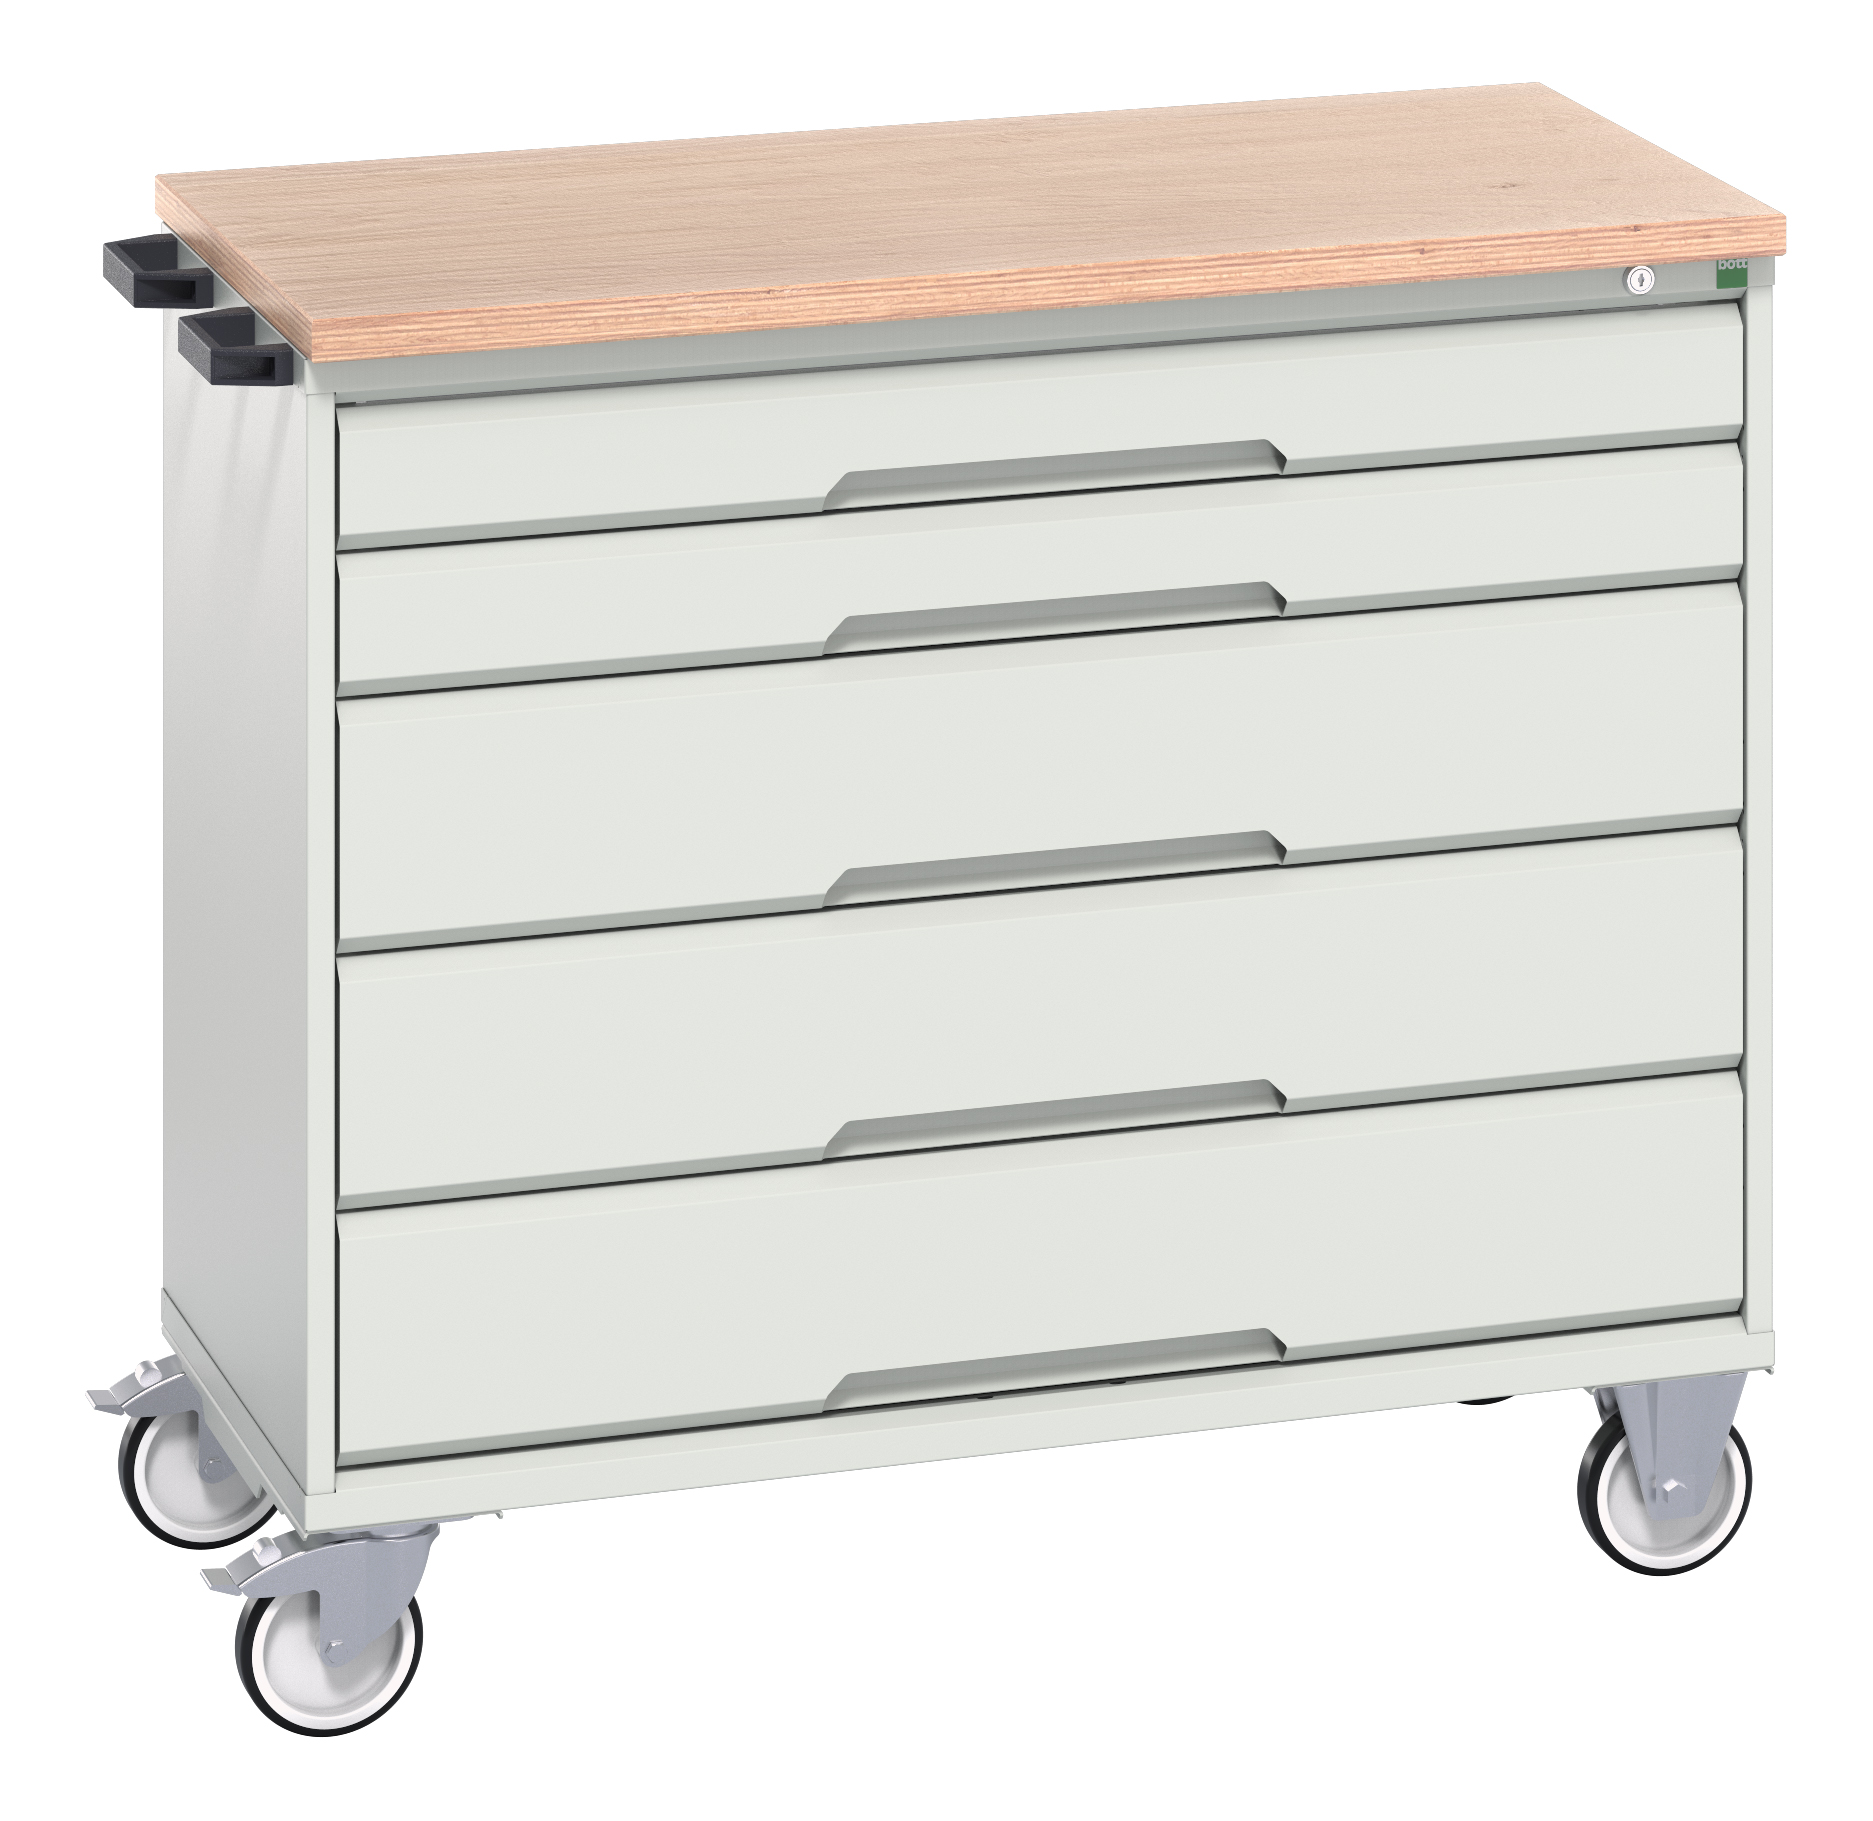 Bott Verso Mobile Drawer Cabinet With 5 Drawers & Multiplex Top - 16927051.16